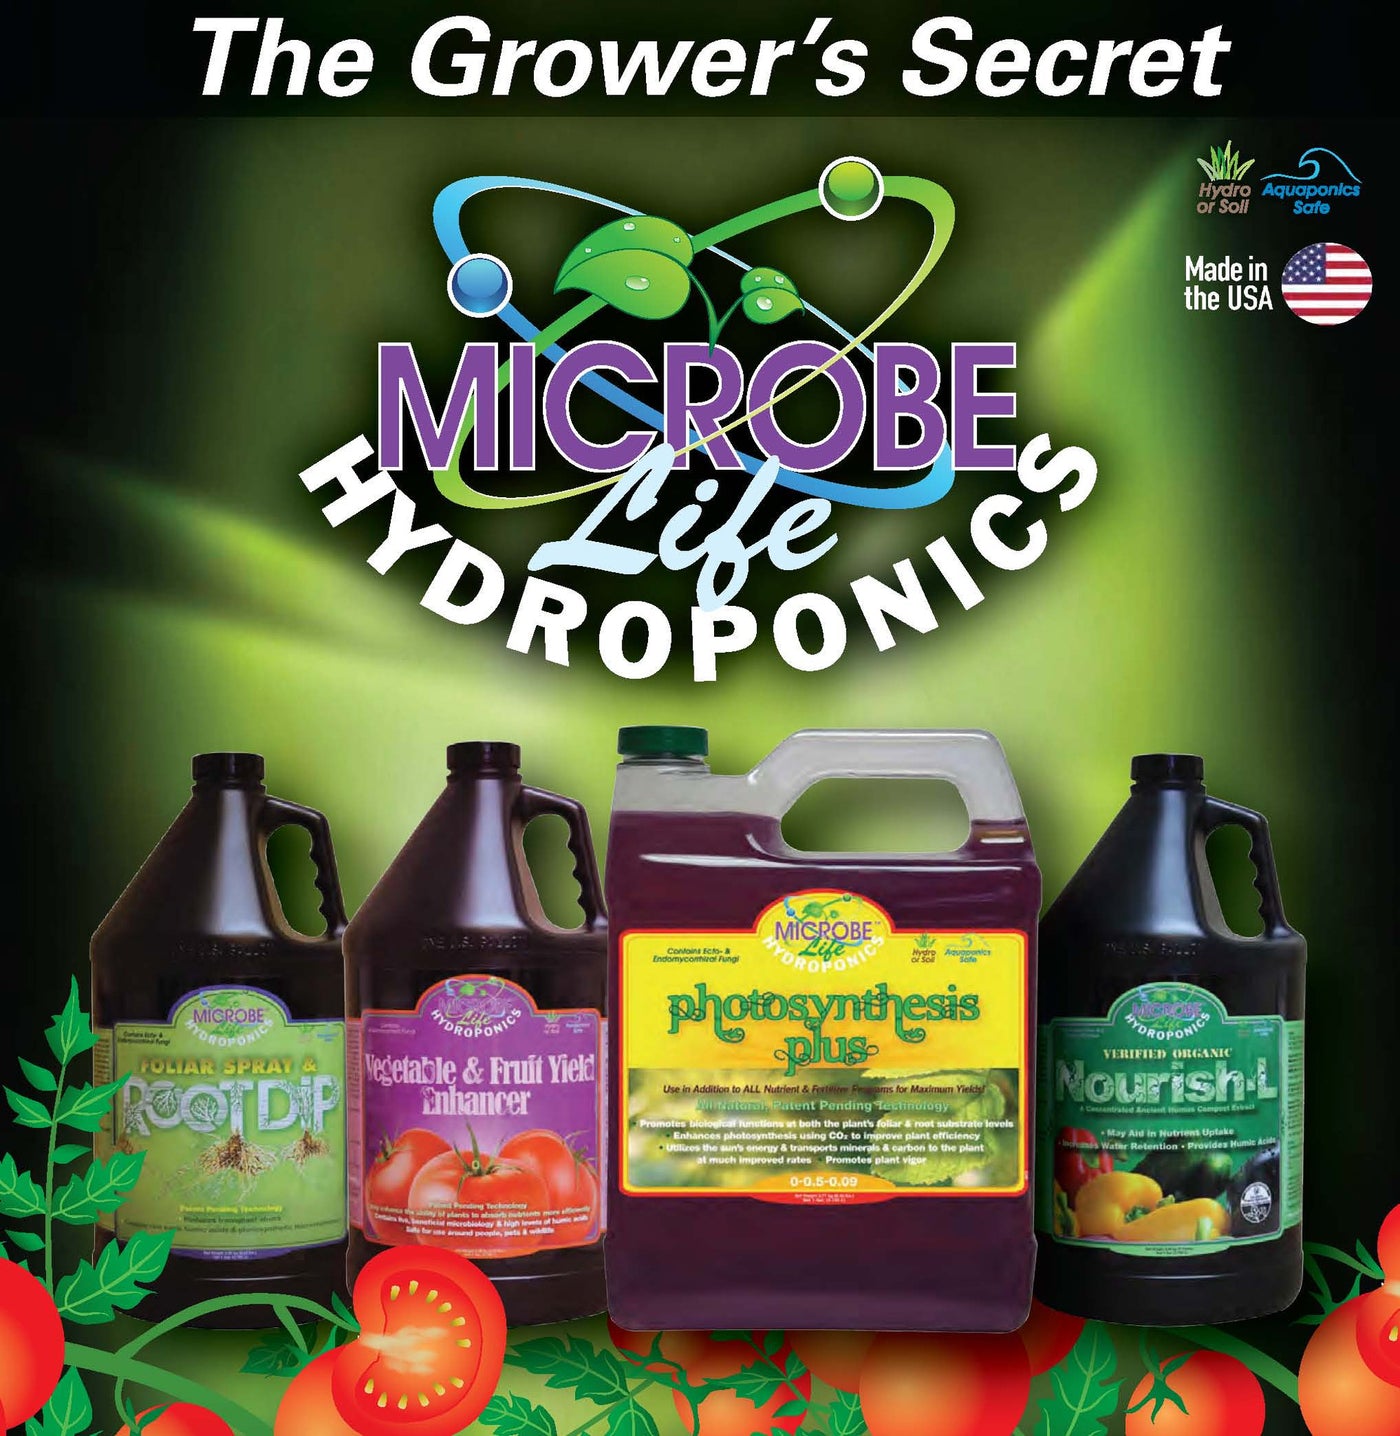 The Grower's Secret Microbe Life Hydroponics Product Line